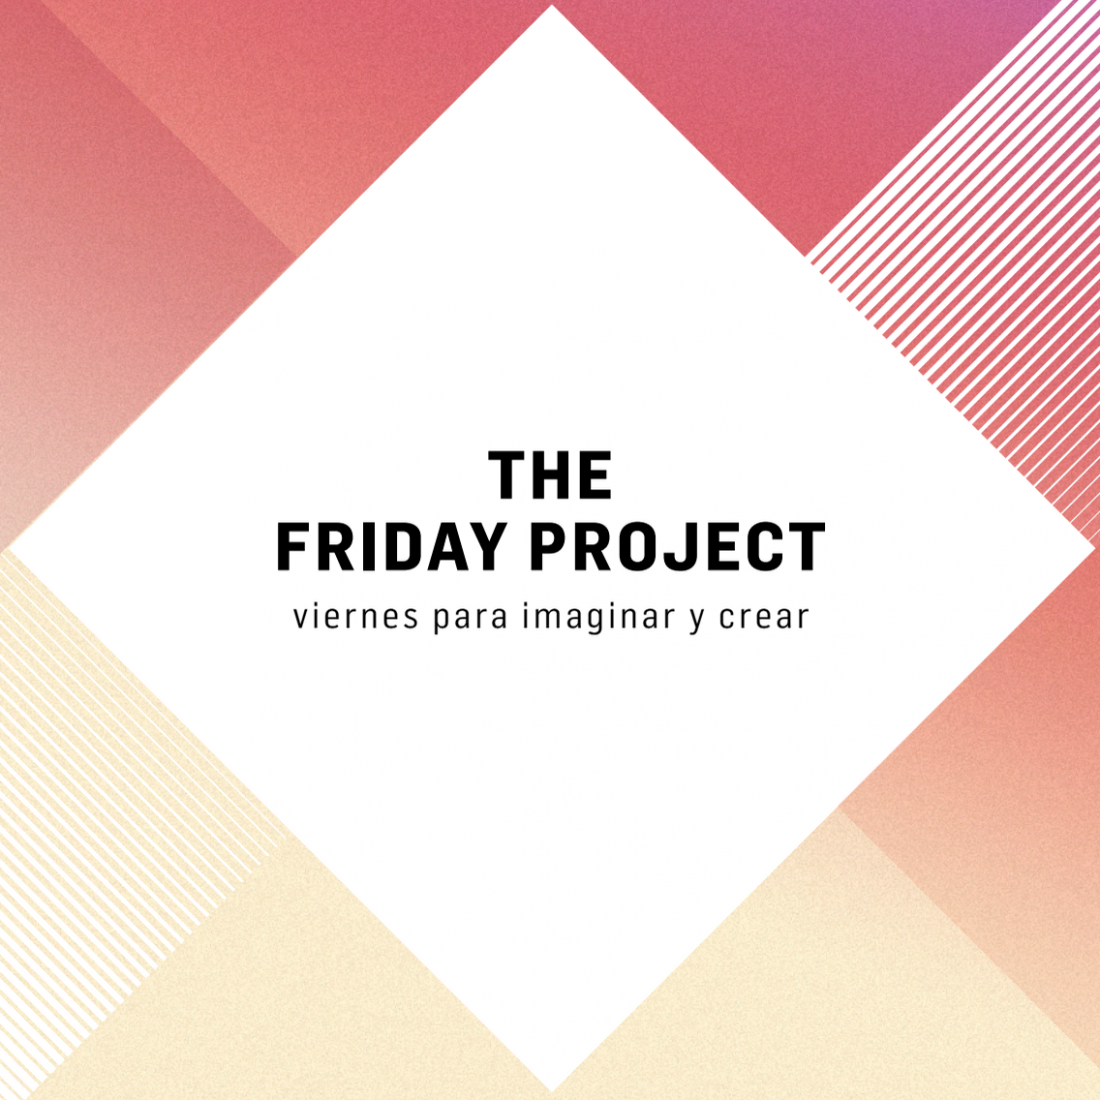 The Friday Project